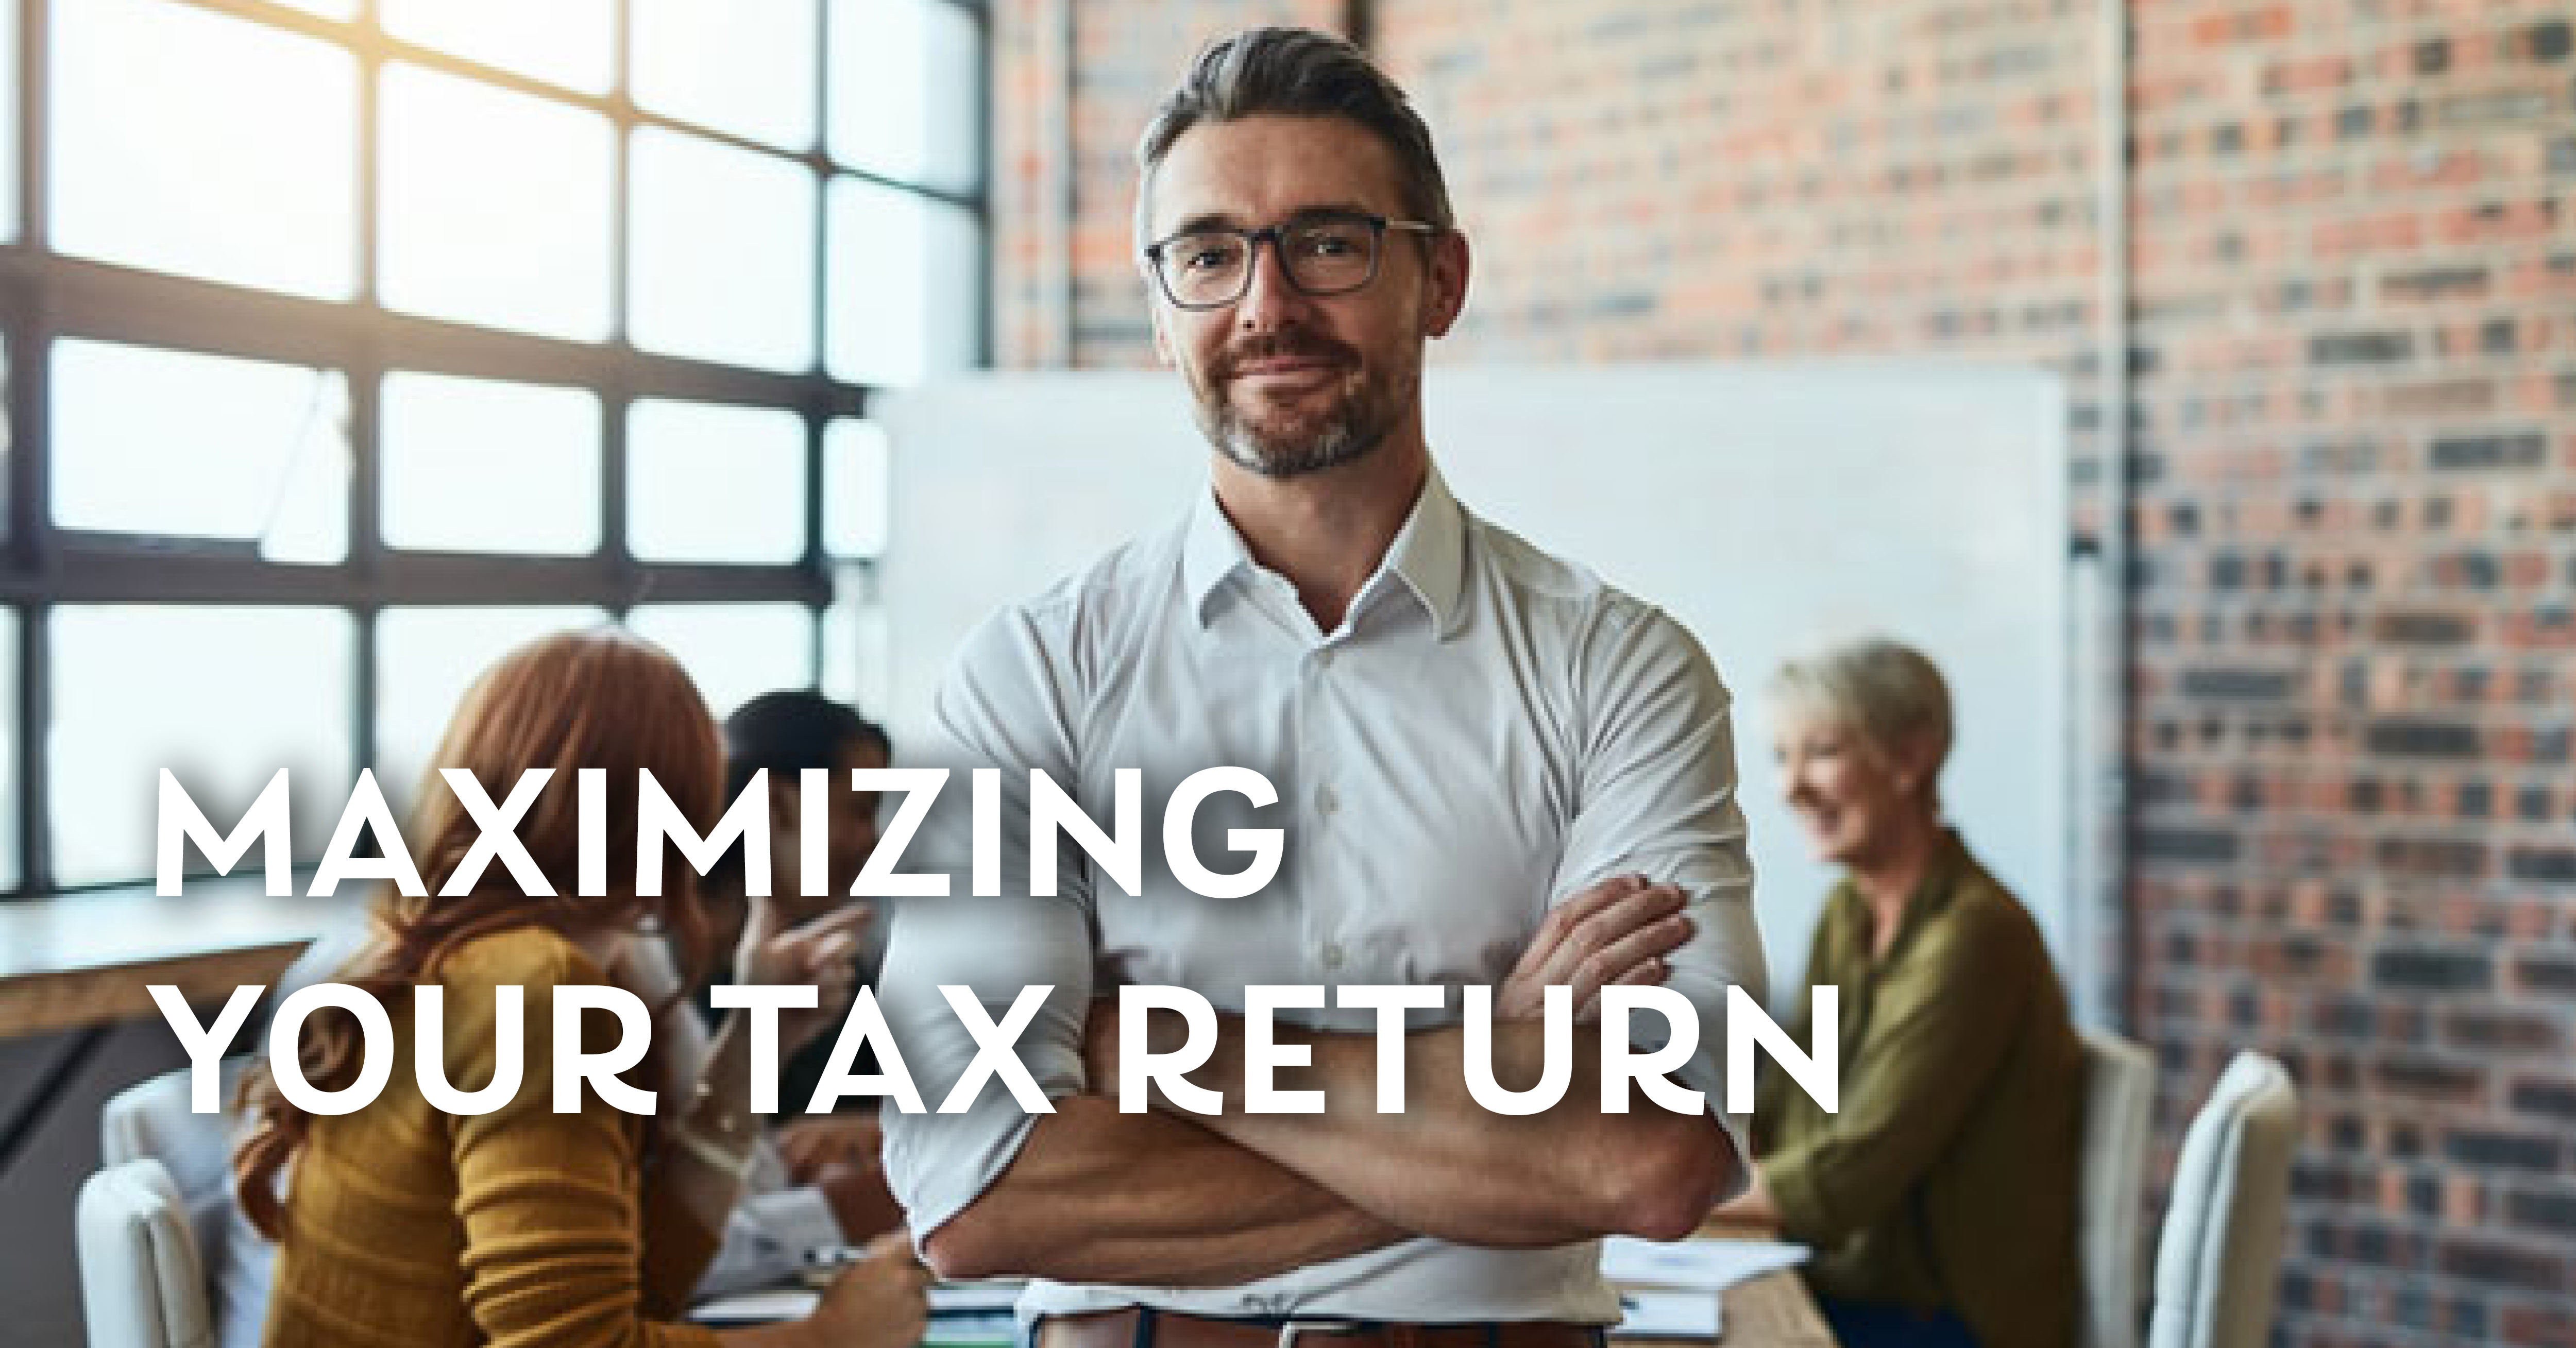 Tax Planning TIps to Maximize Your Return Scarborough Associates